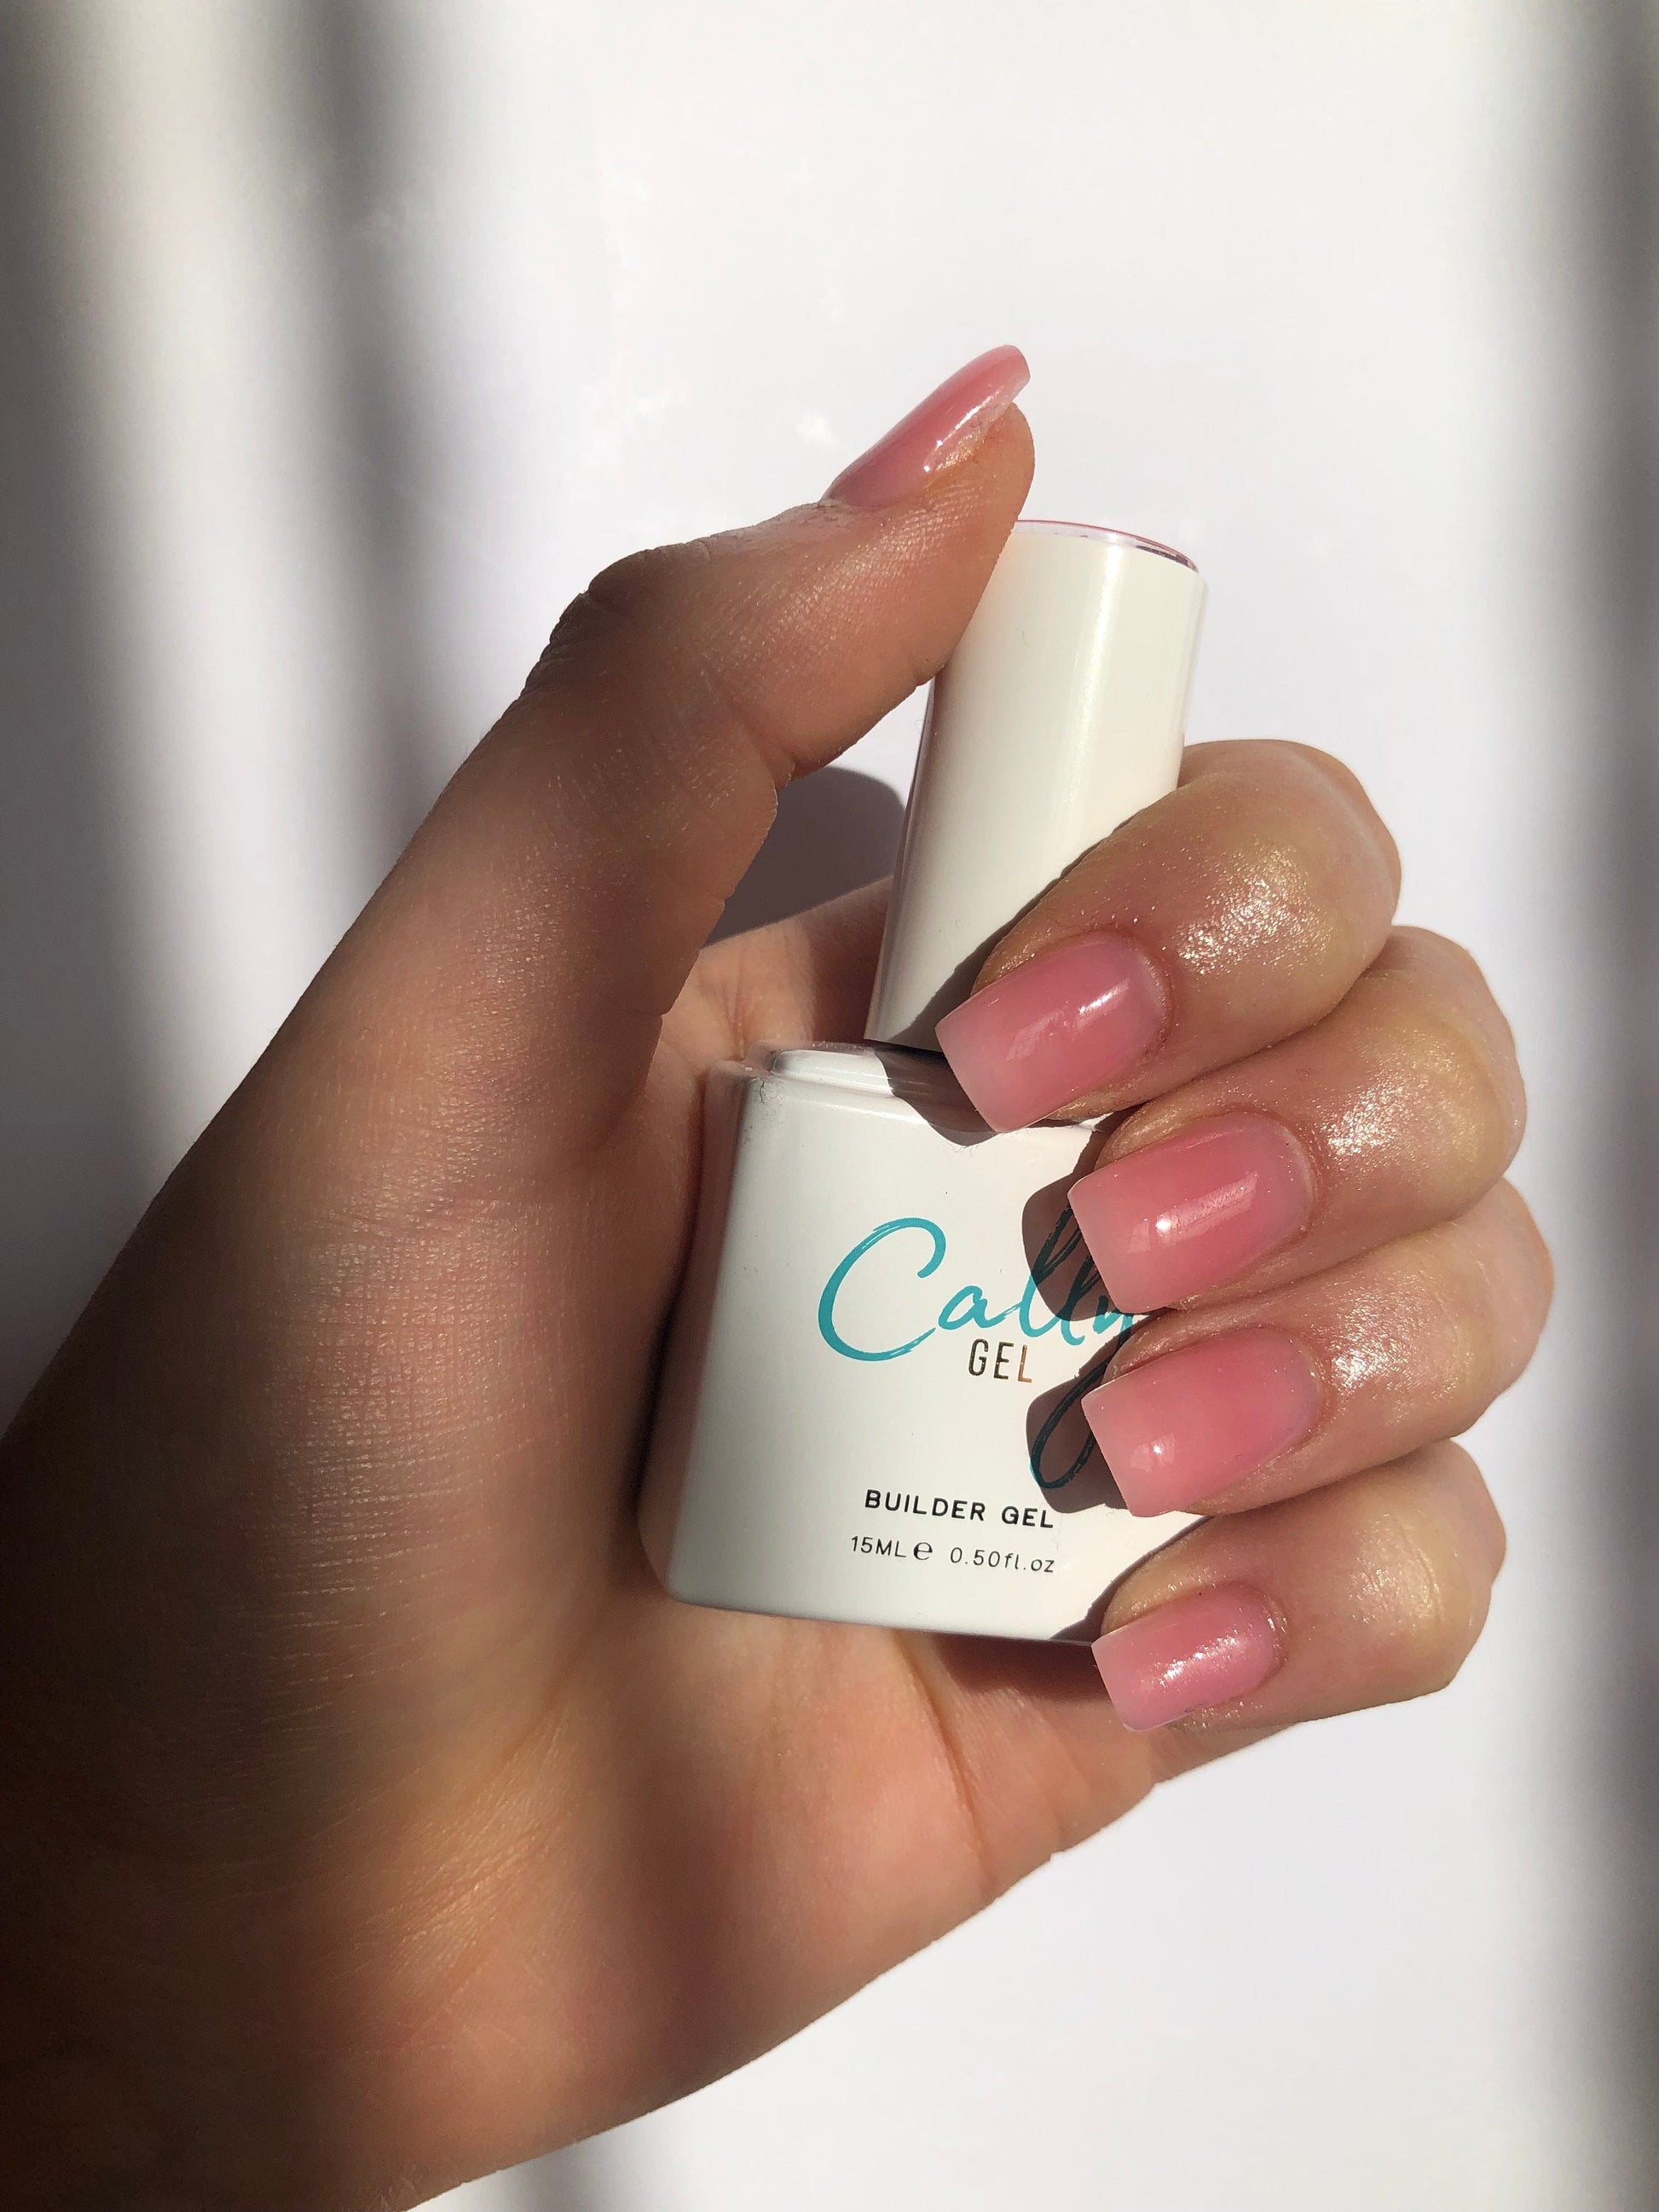 Hand Manicured with Dream Cally Builder Gel Nail Polish and Bottle in Hand